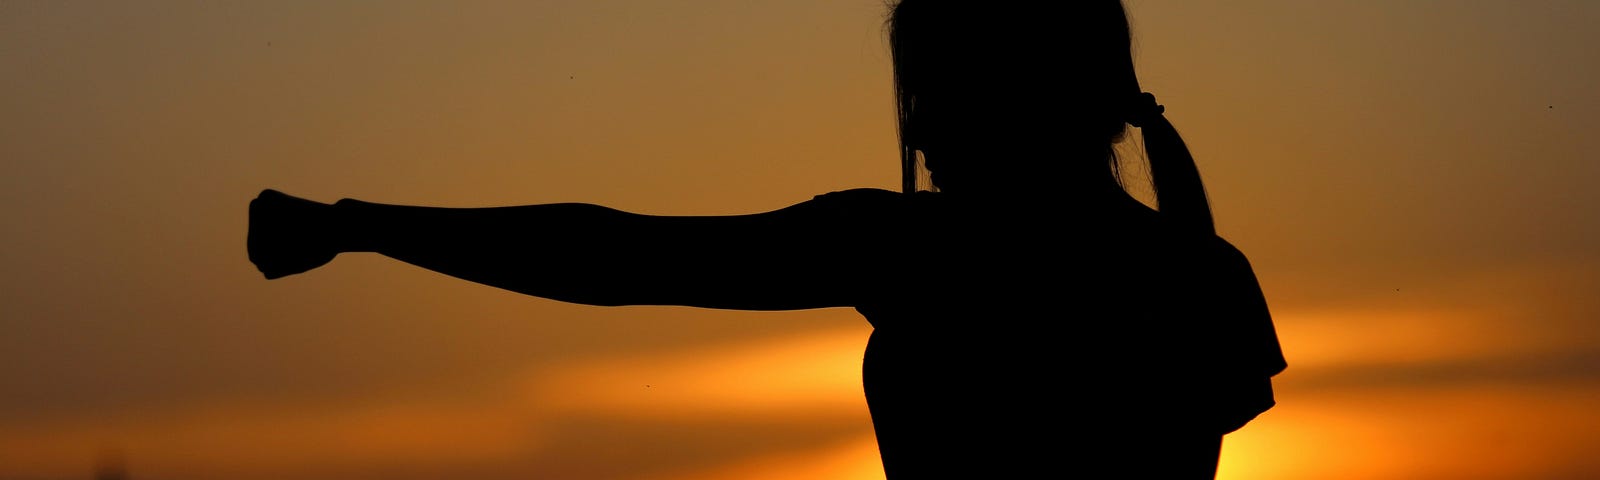 Girl practicing martial arts against a sunset.